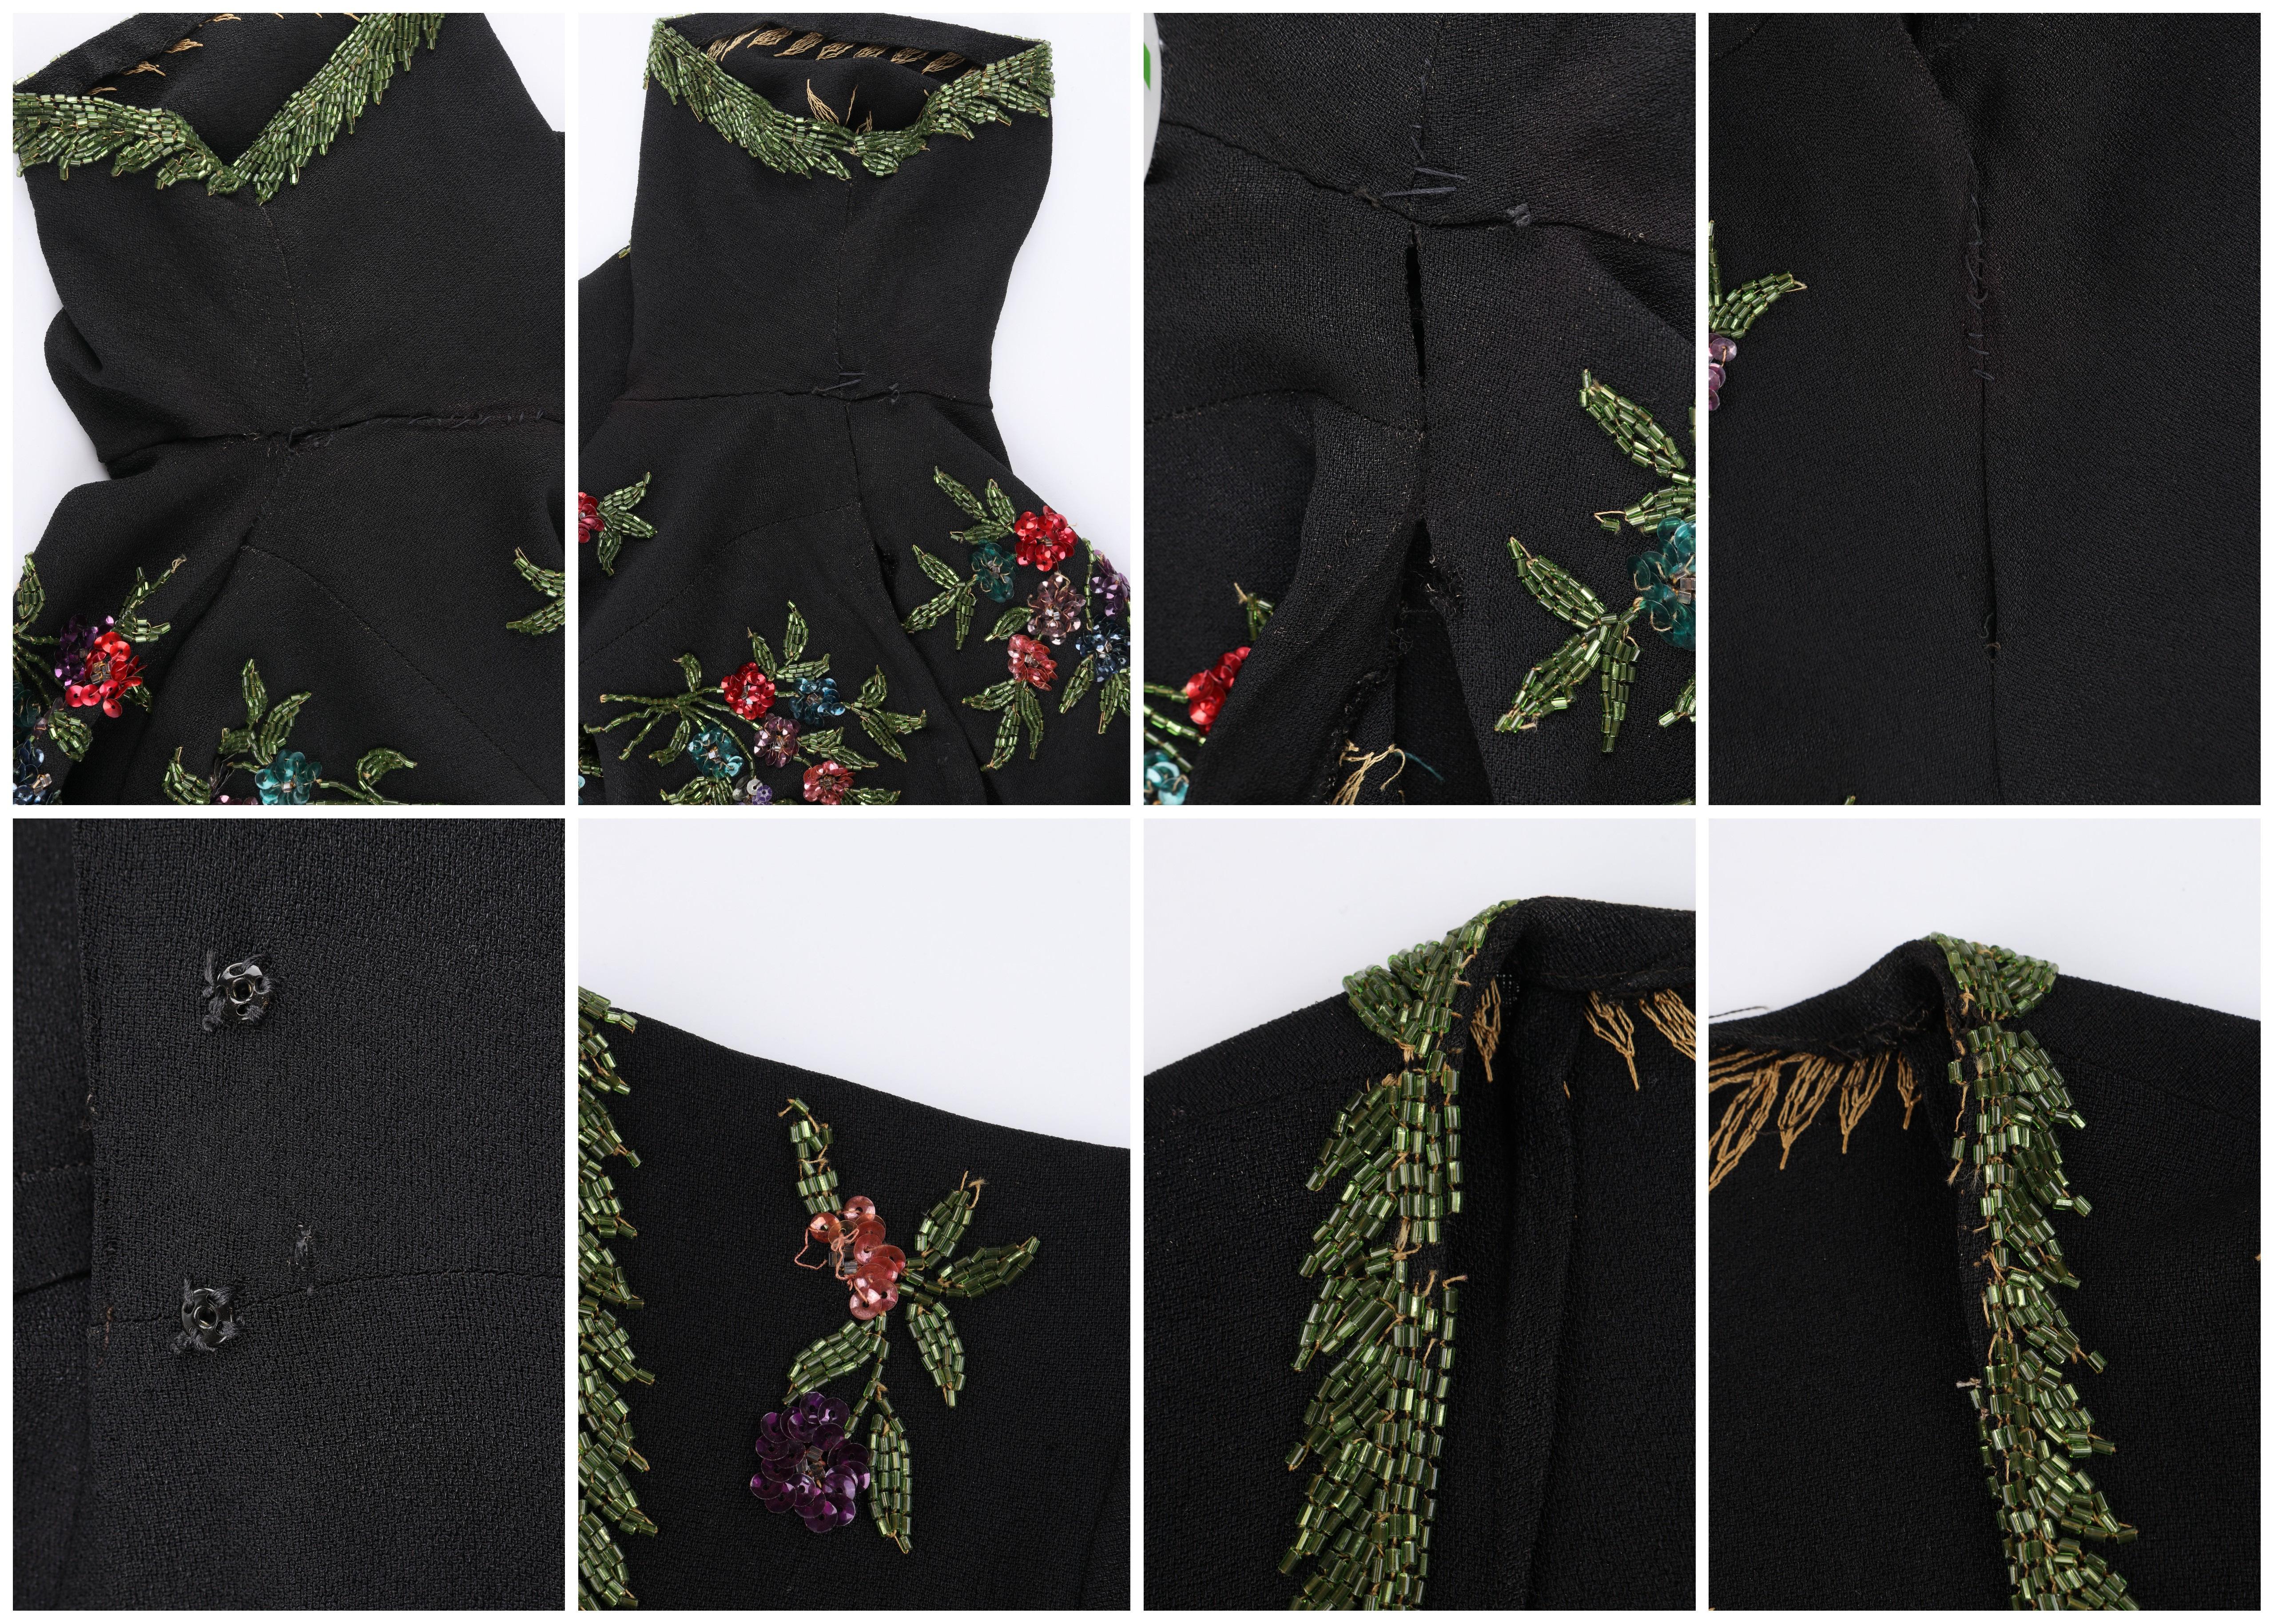 Couture c. 1940’s Black Multicolor Floral Glass Bead Embroidered Shift Dress 5